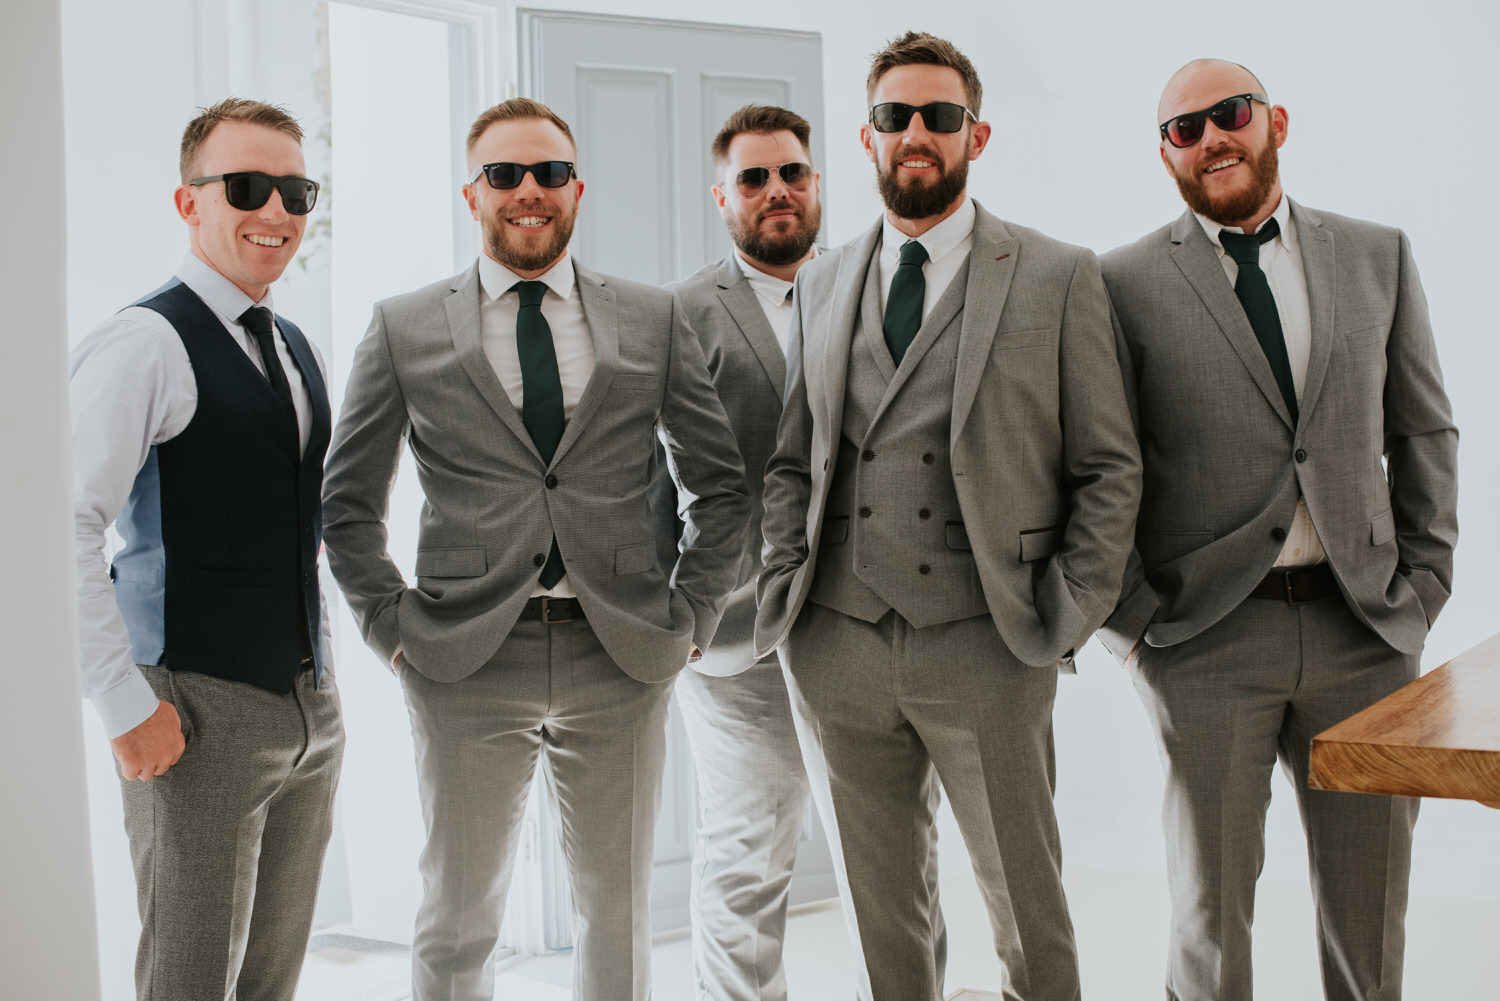 Mykonos wedding photographer: groom and his men portrait with the sunglasses in the villa before the ceremony.